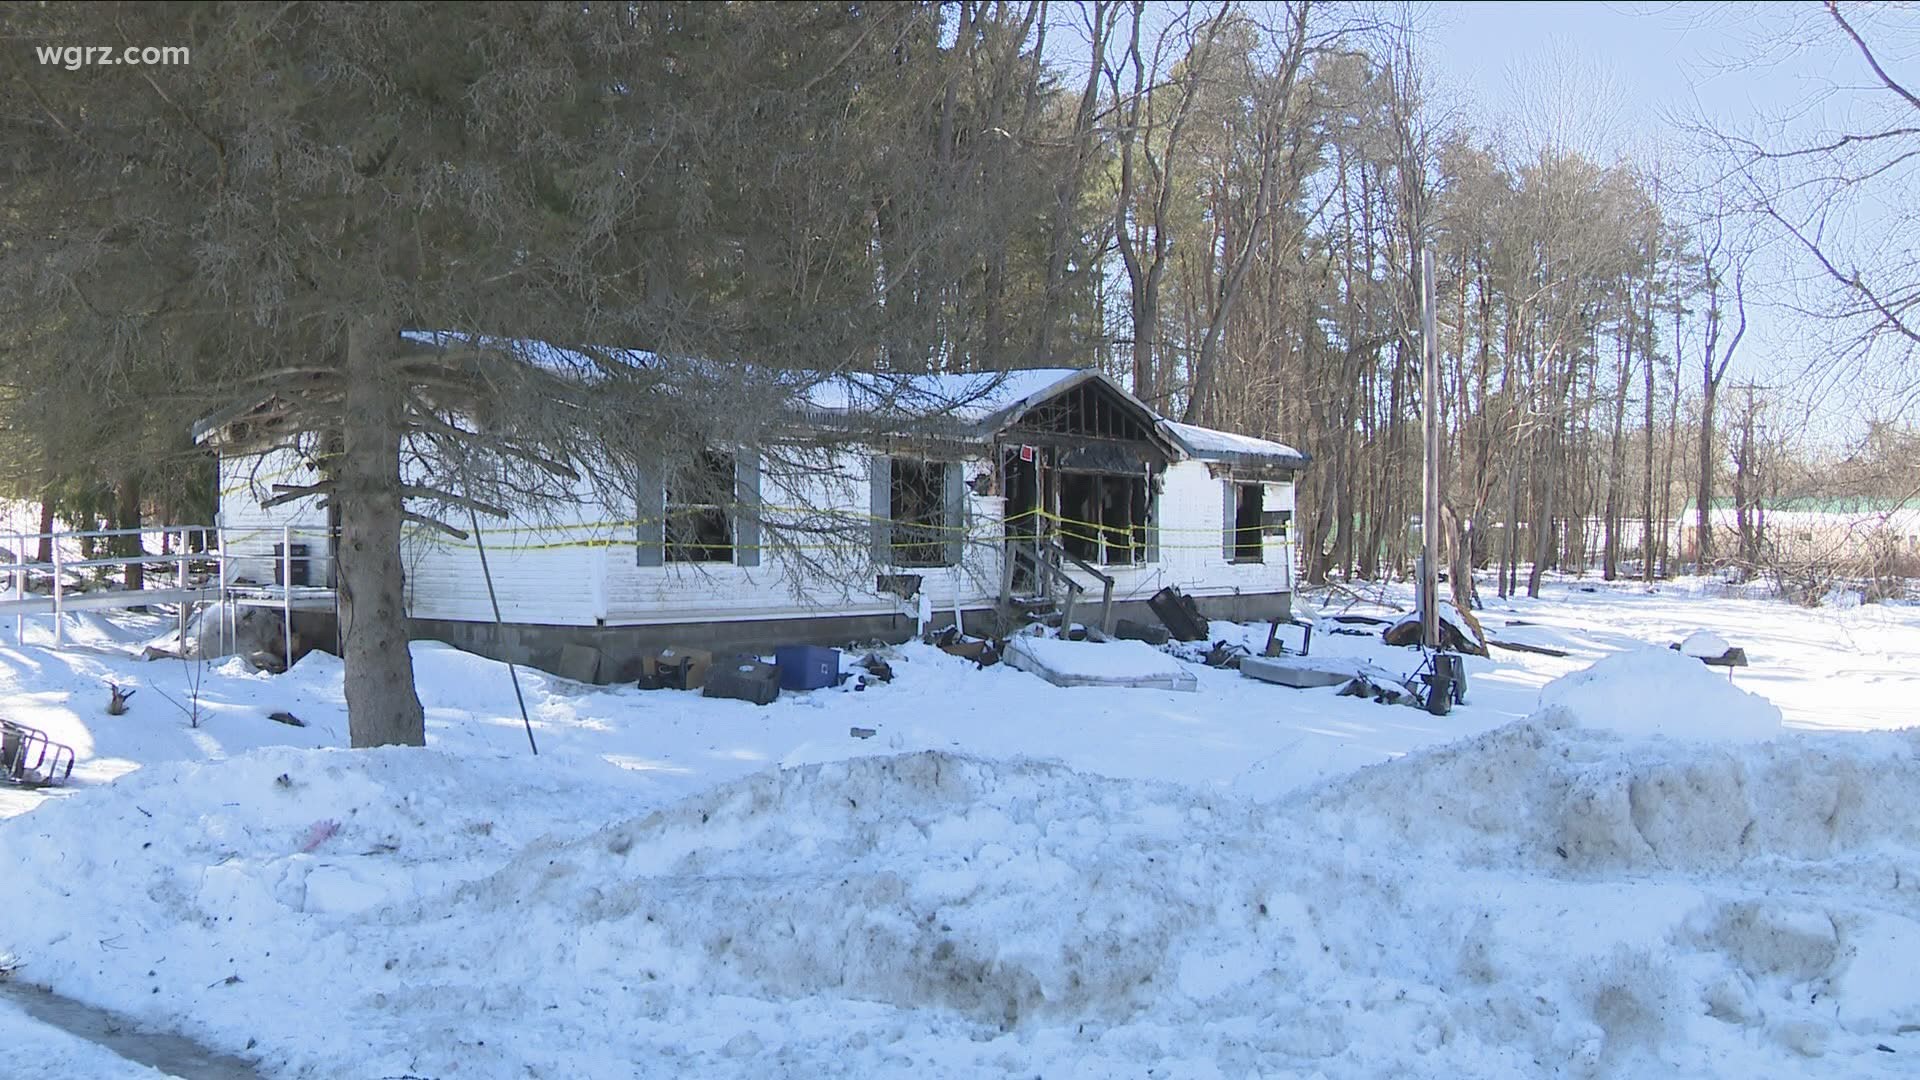 A woman in Cattaraugus County is still recovering from a fire that destroyed her home last month, but she says she's just thankful to be alive.